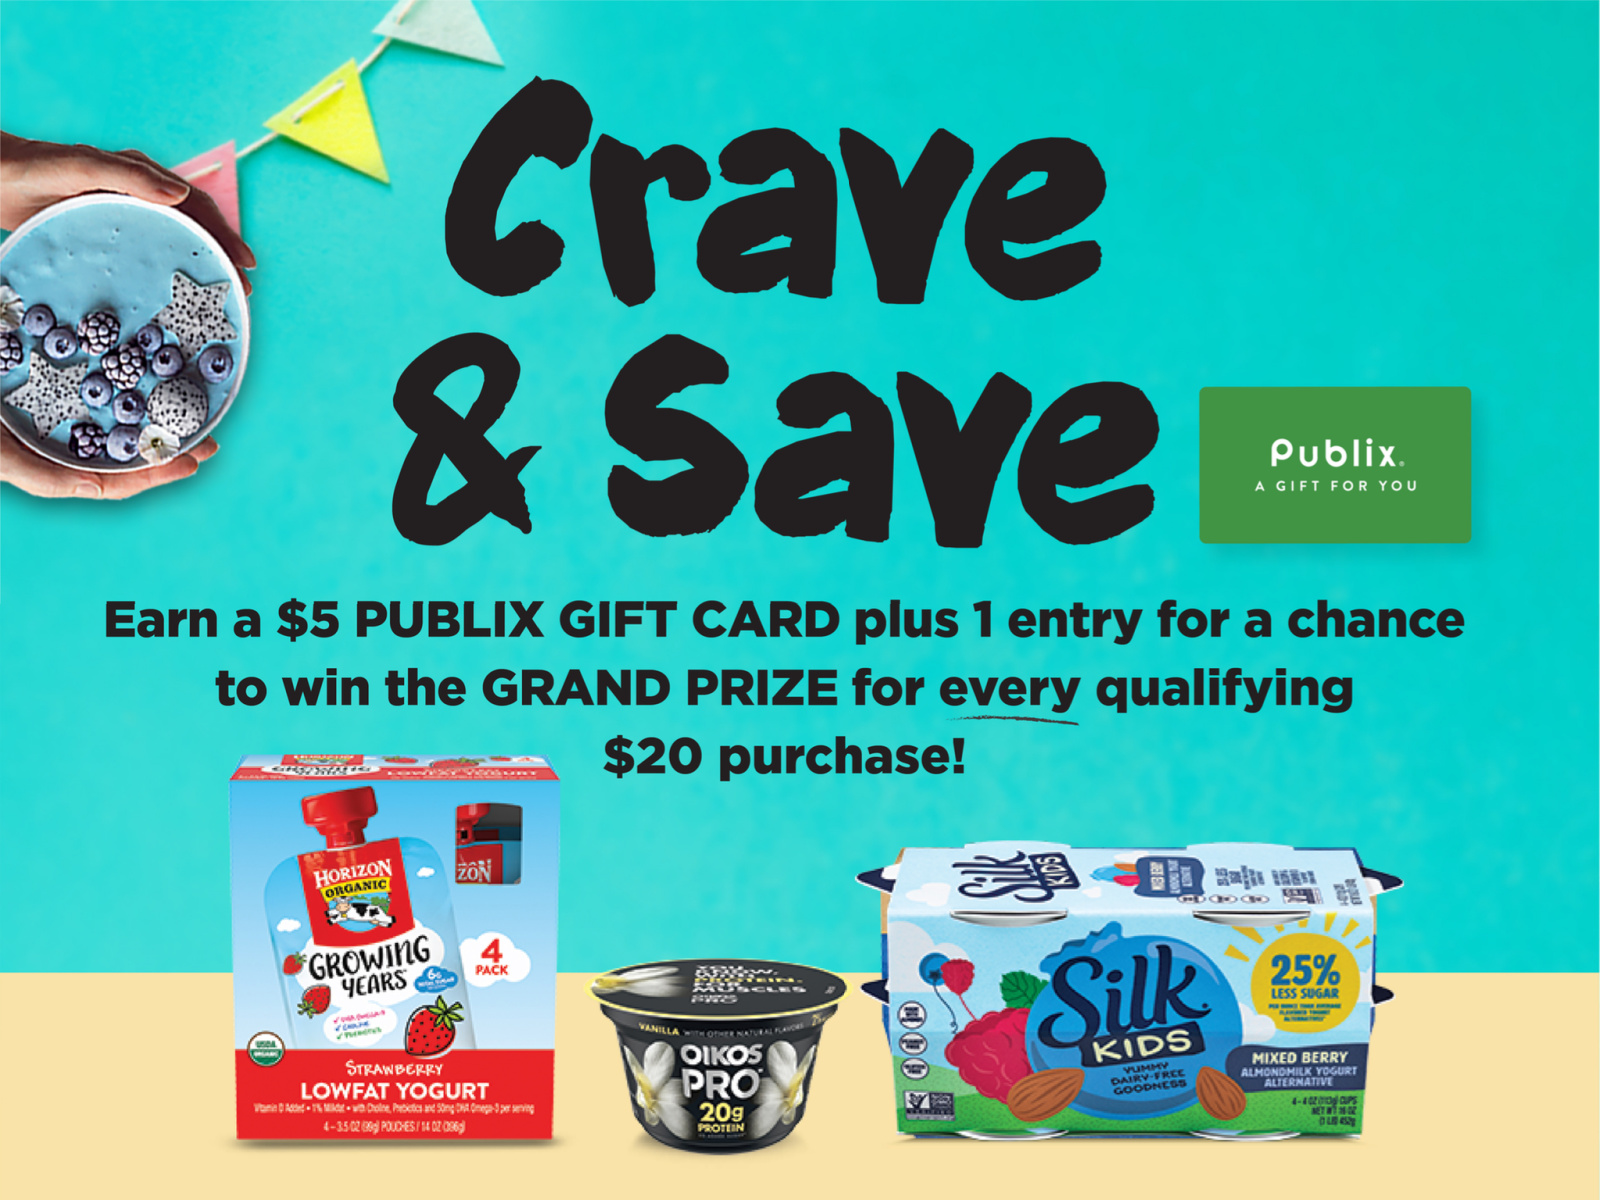 Great Week To Earn Gift Cards With The Crave & Save Program on I Heart Publix